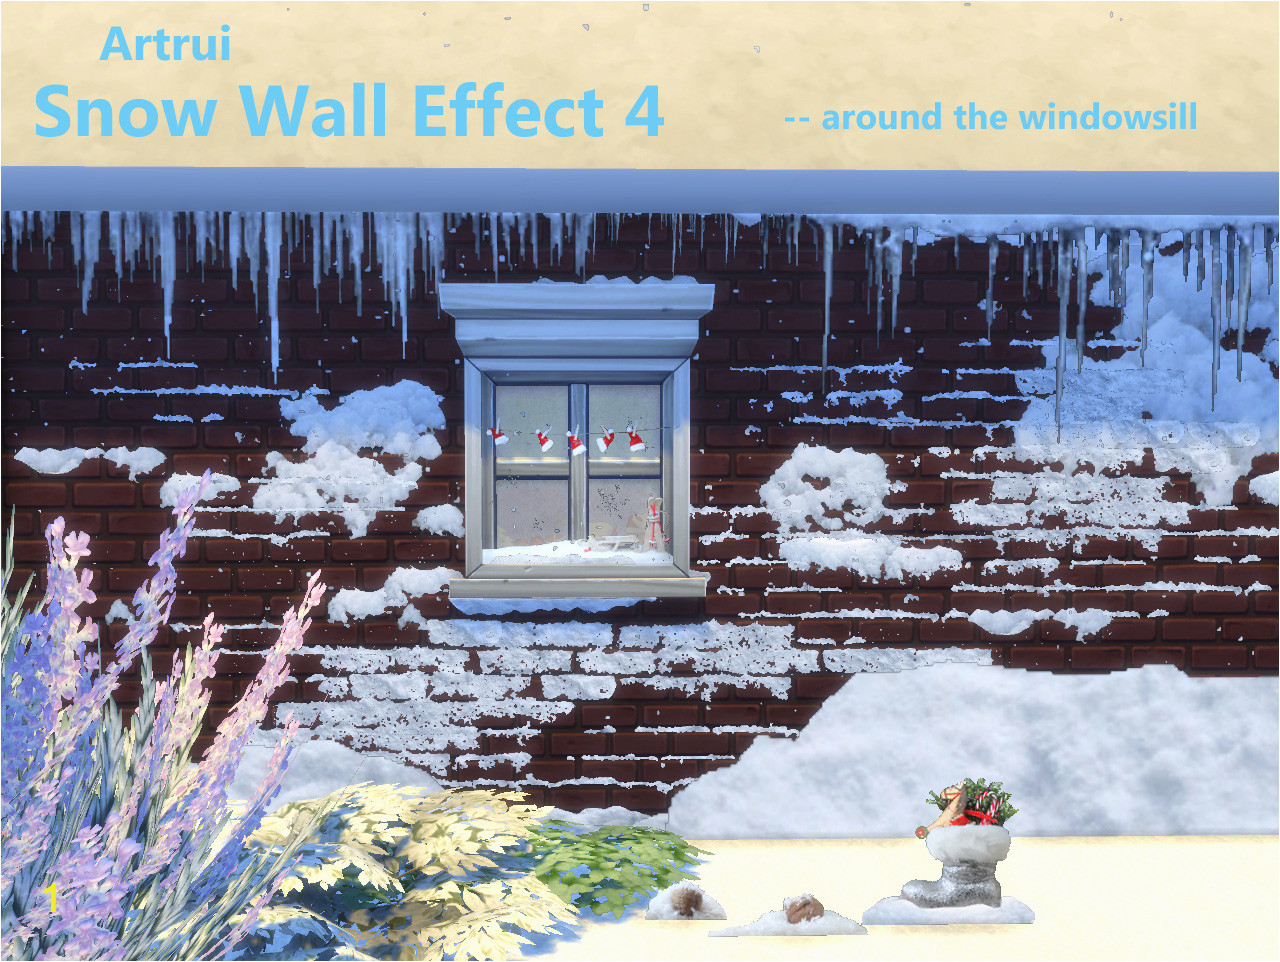 Sims 3 Wall Murals Mod the Sims Snow Wall Effect 4